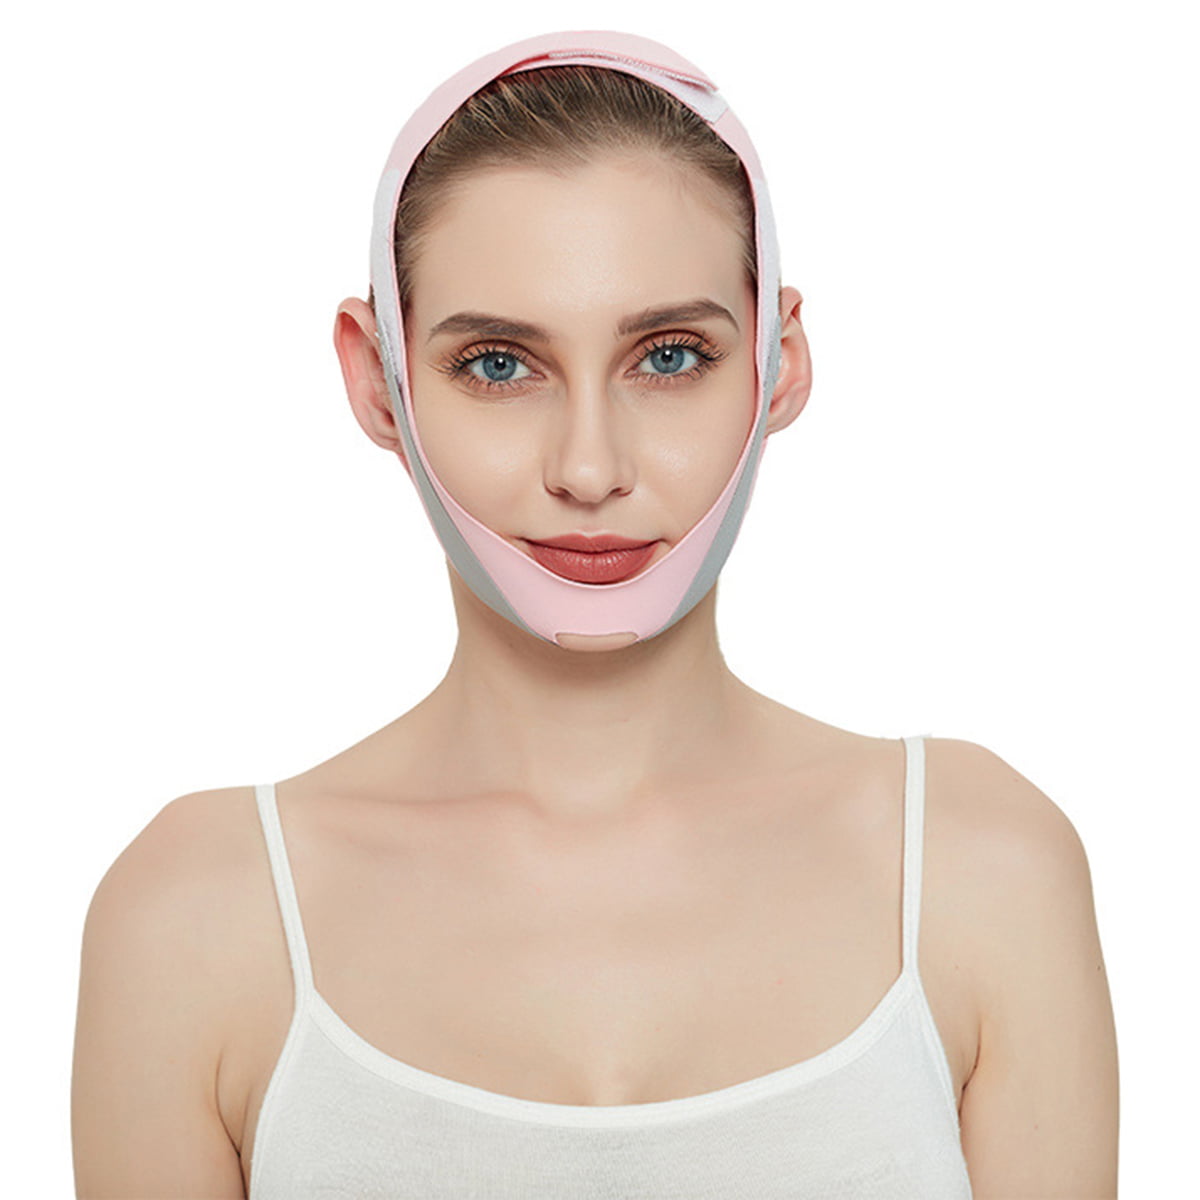 Klyque Reusable V Shaped Slimming Face Mask and Double Chin Reducer Strap,  Skin Care, Lifting Belt, Face Lift, Face Slimmer